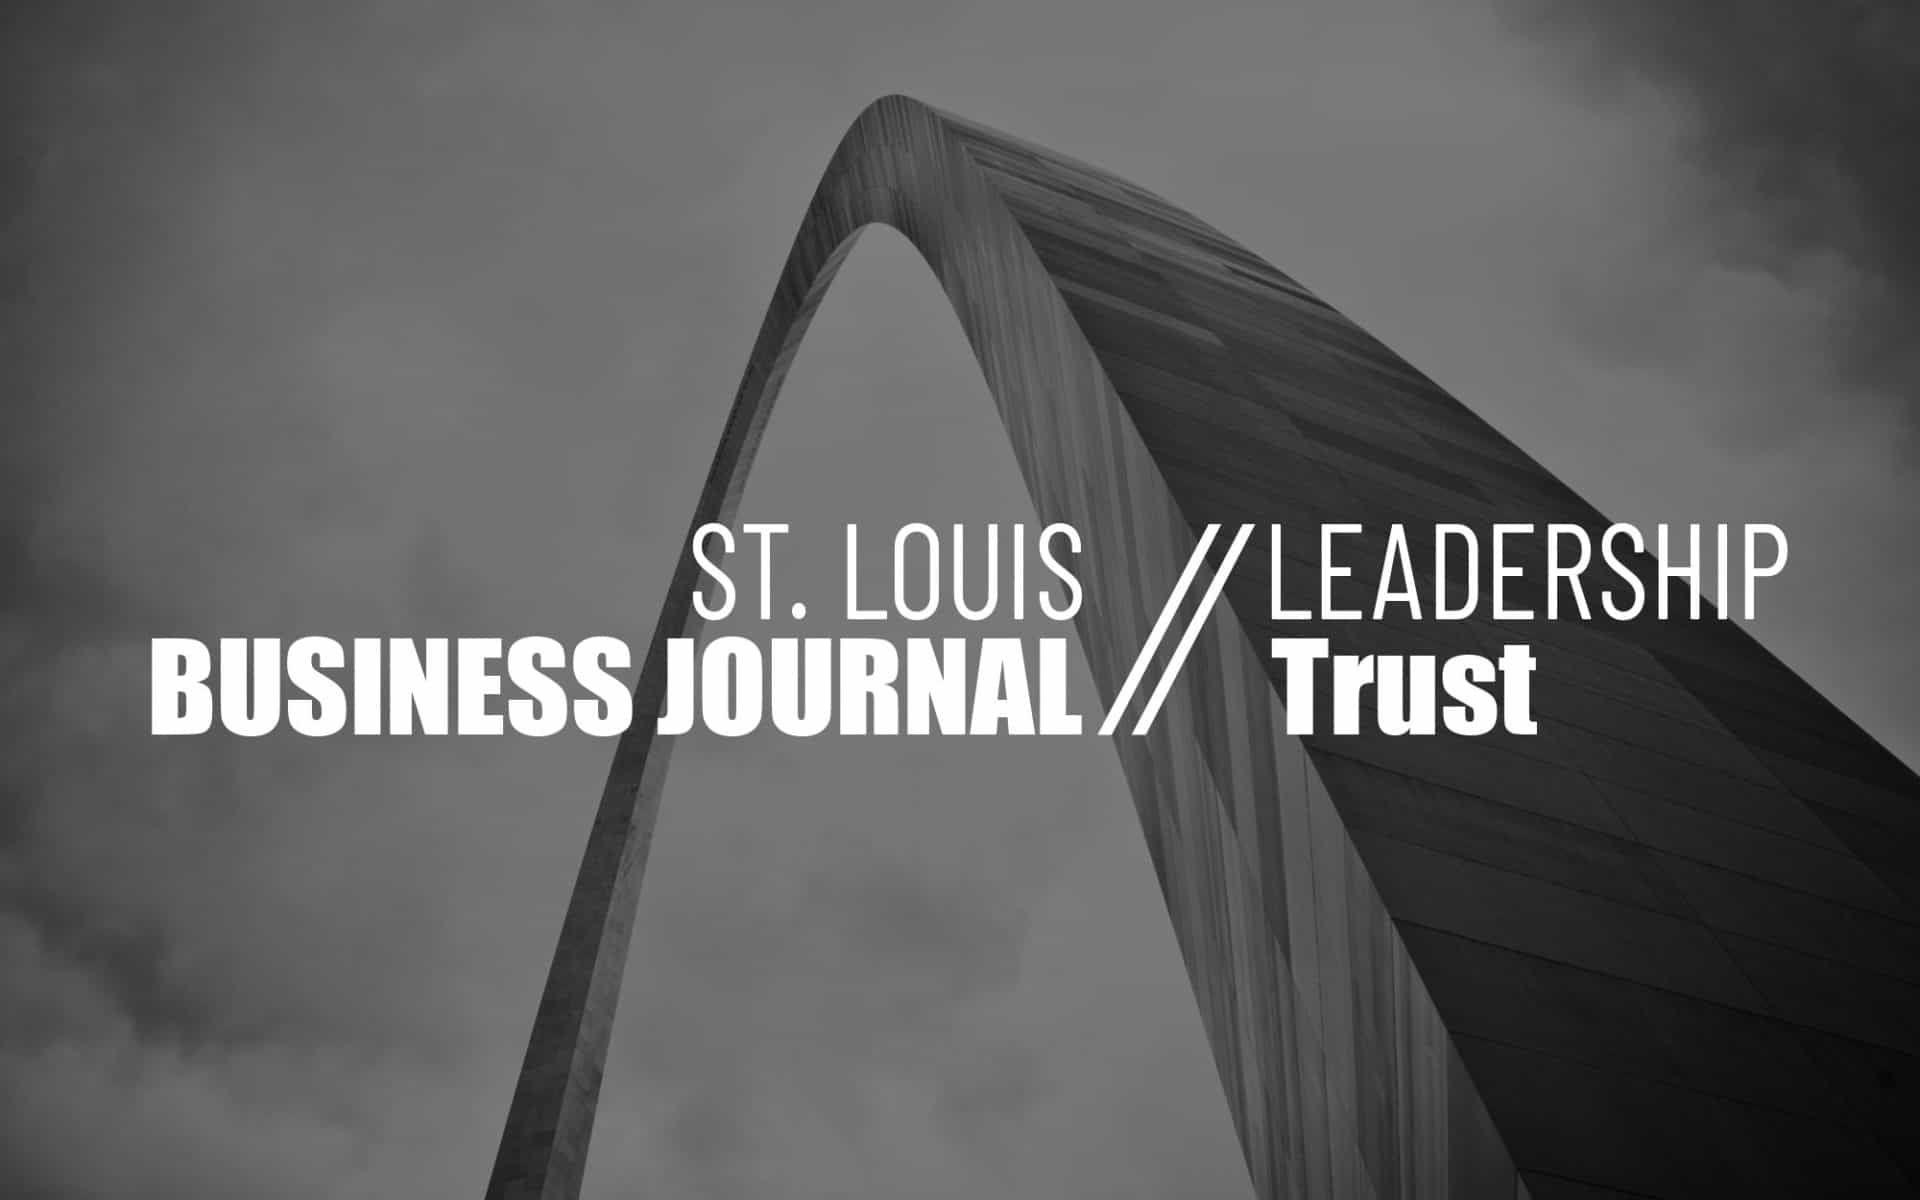 STL-Business-Journal logo on the arch